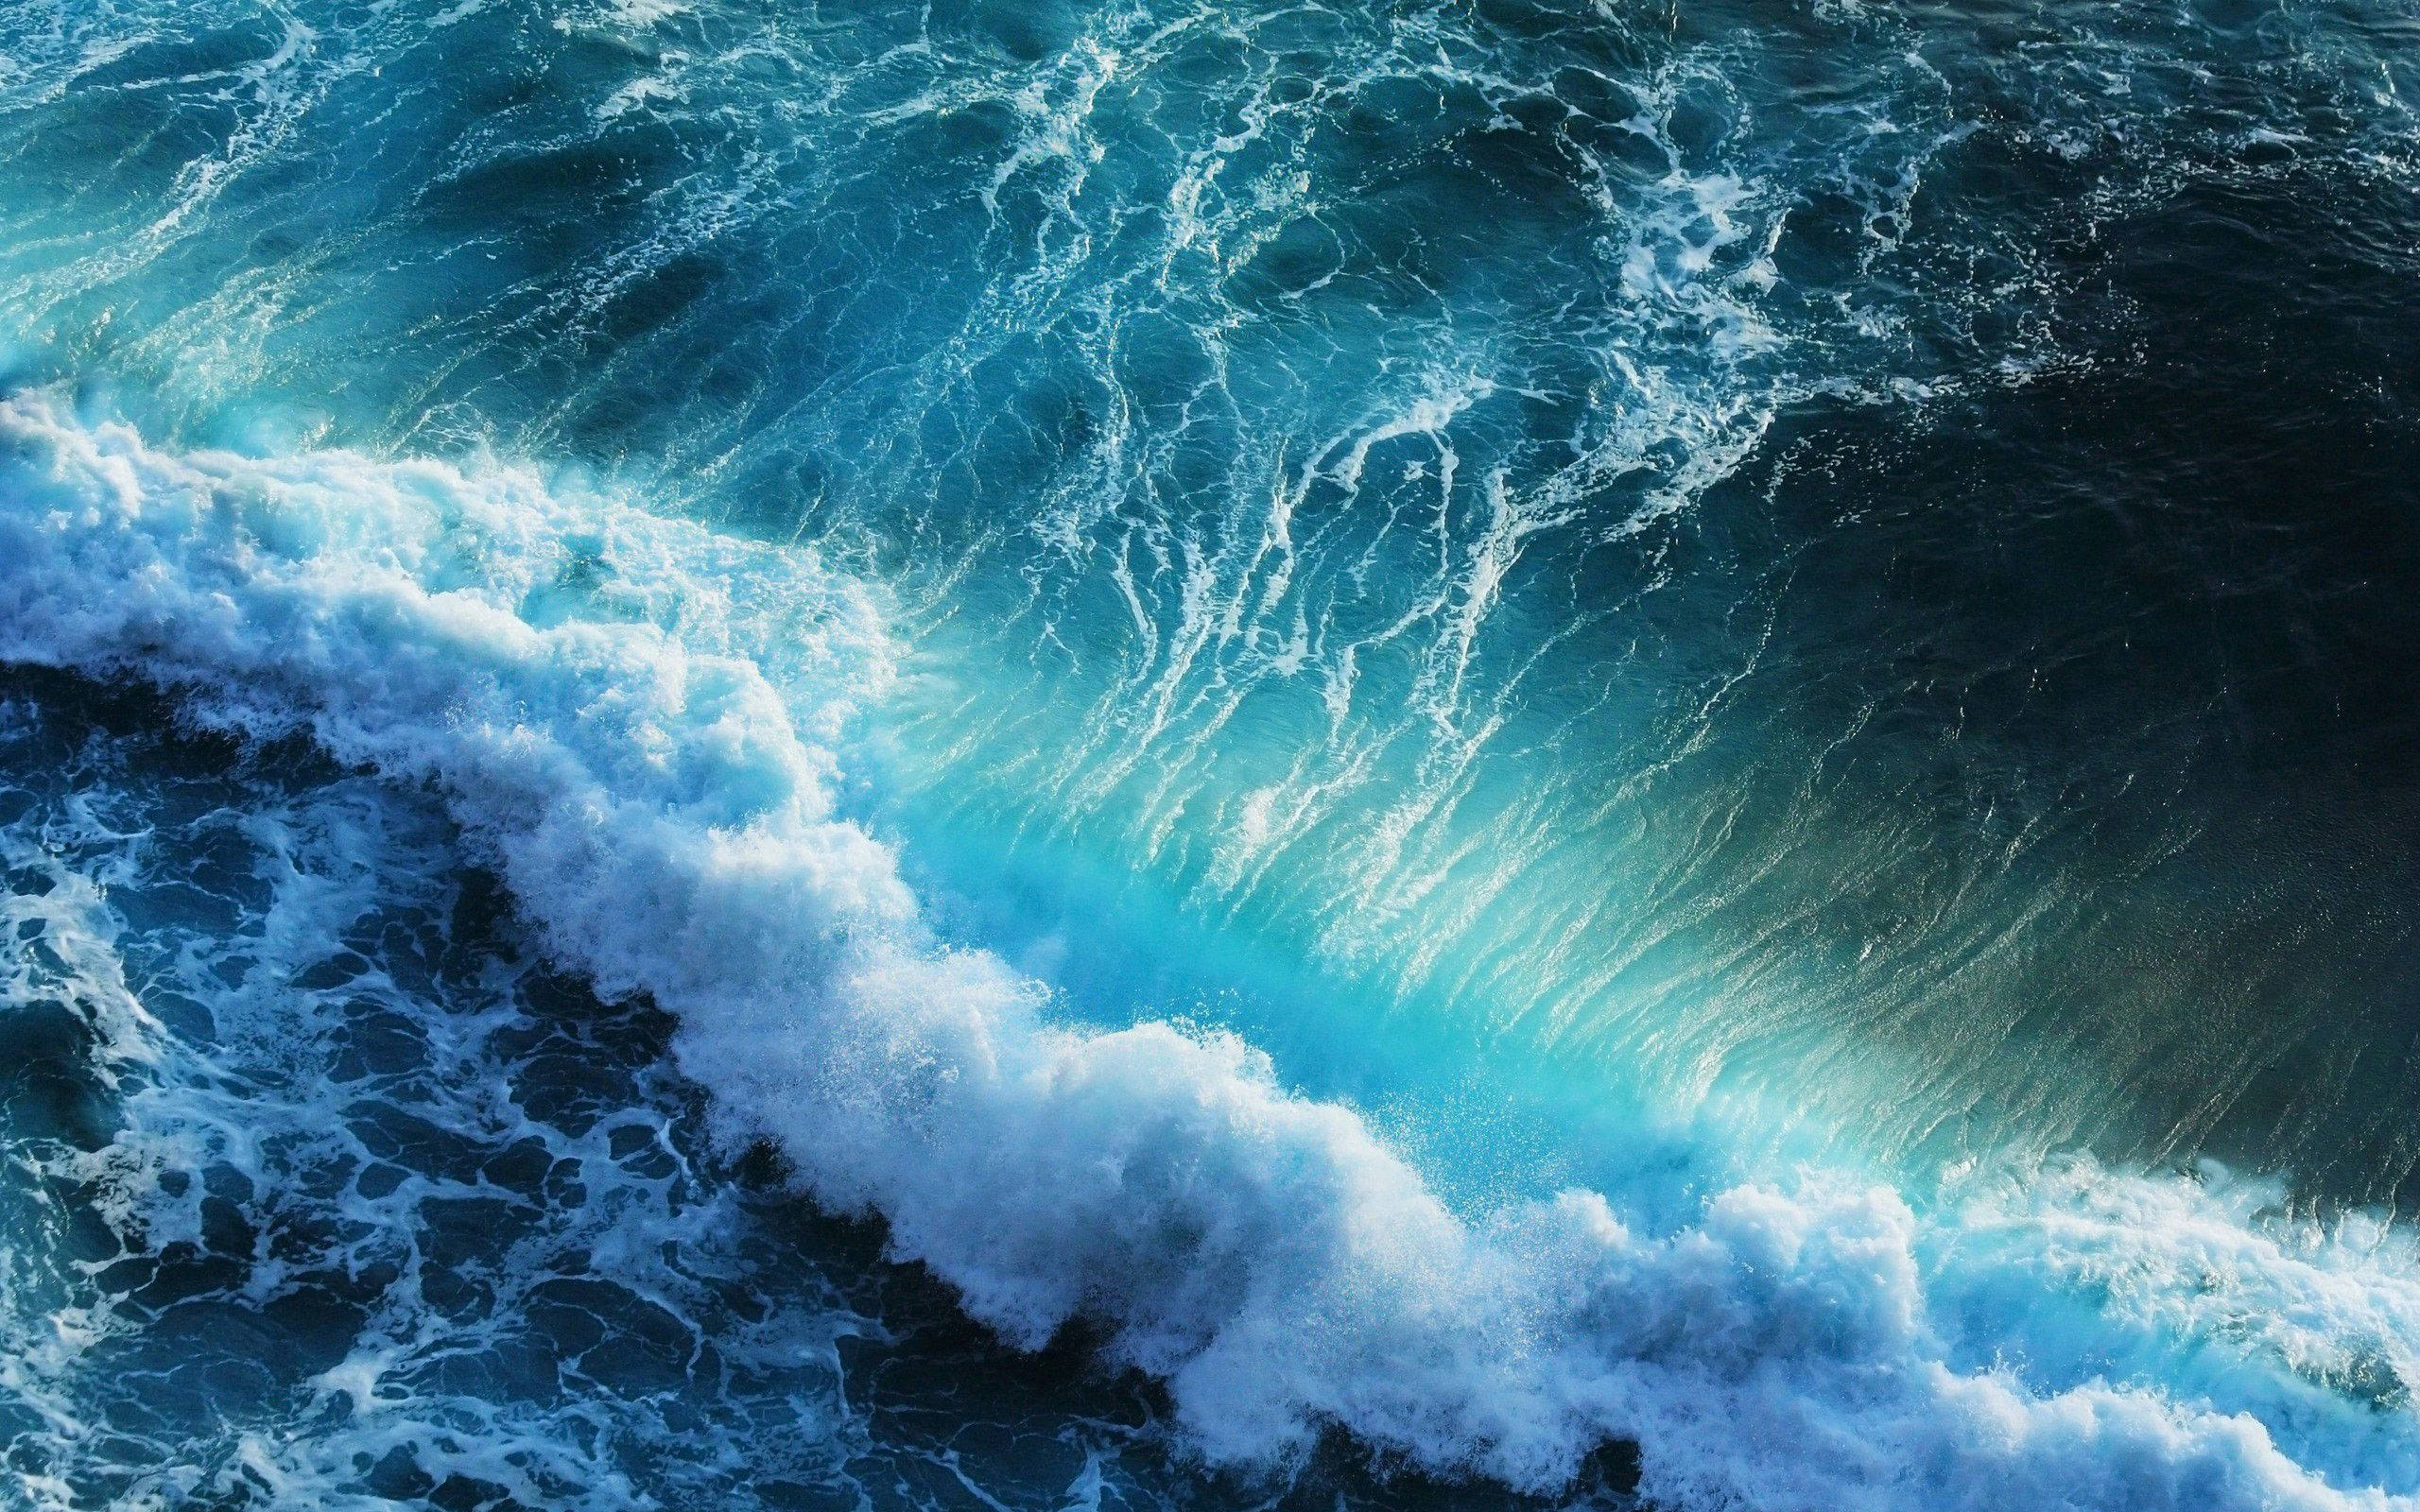 An aerial view of a blue ocean with waves - Ocean, wave